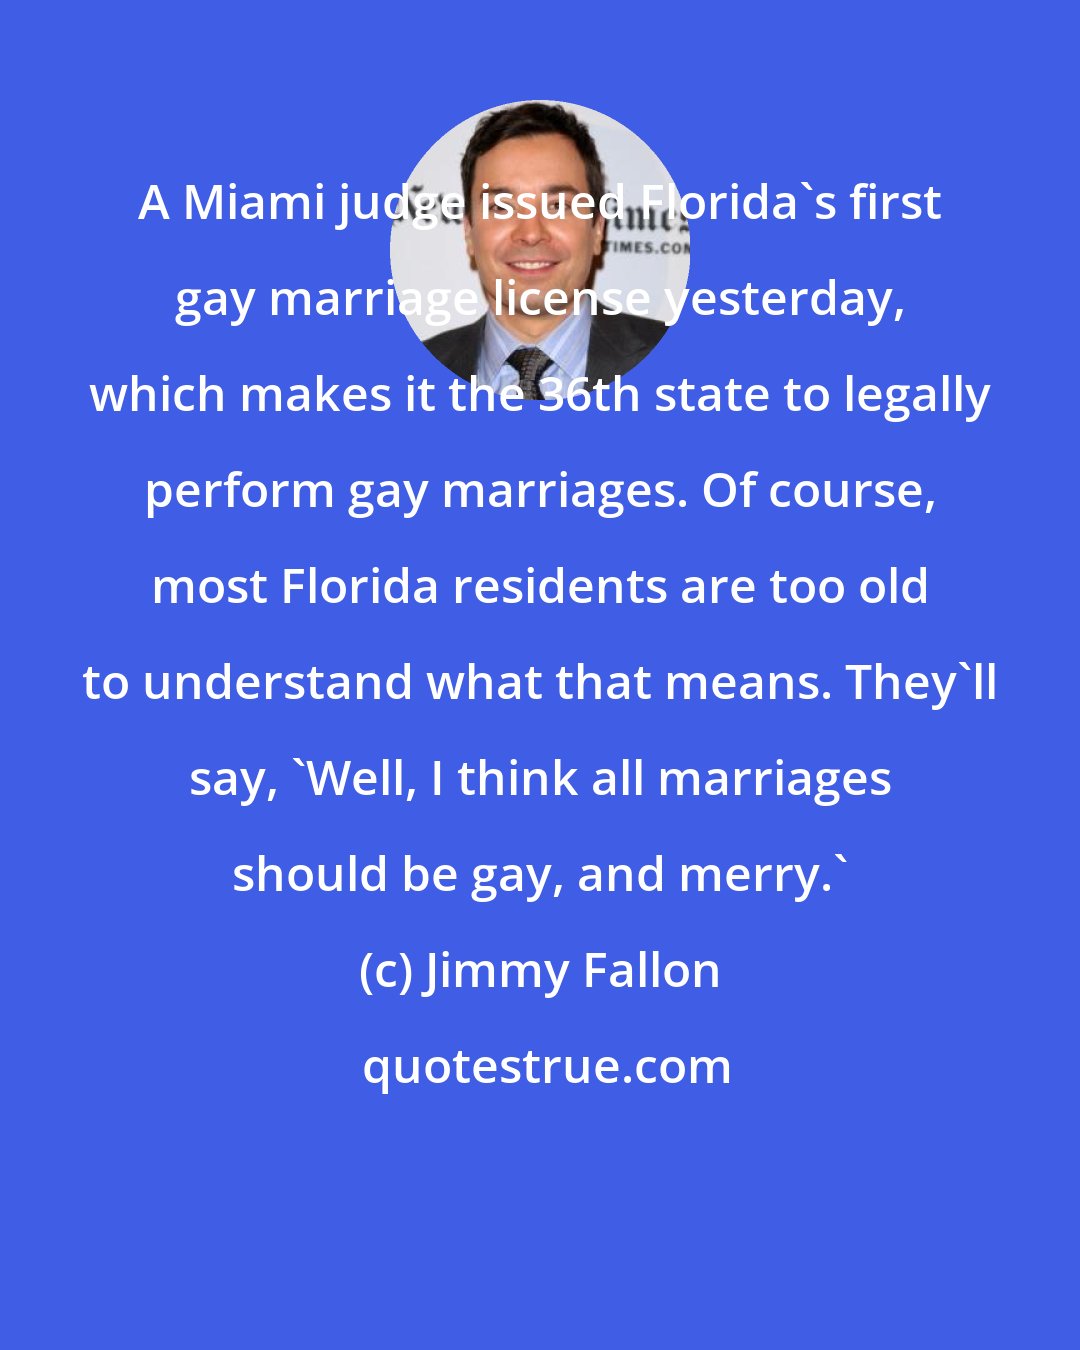 Jimmy Fallon: A Miami judge issued Florida's first gay marriage license yesterday, which makes it the 36th state to legally perform gay marriages. Of course, most Florida residents are too old to understand what that means. They'll say, 'Well, I think all marriages should be gay, and merry.'